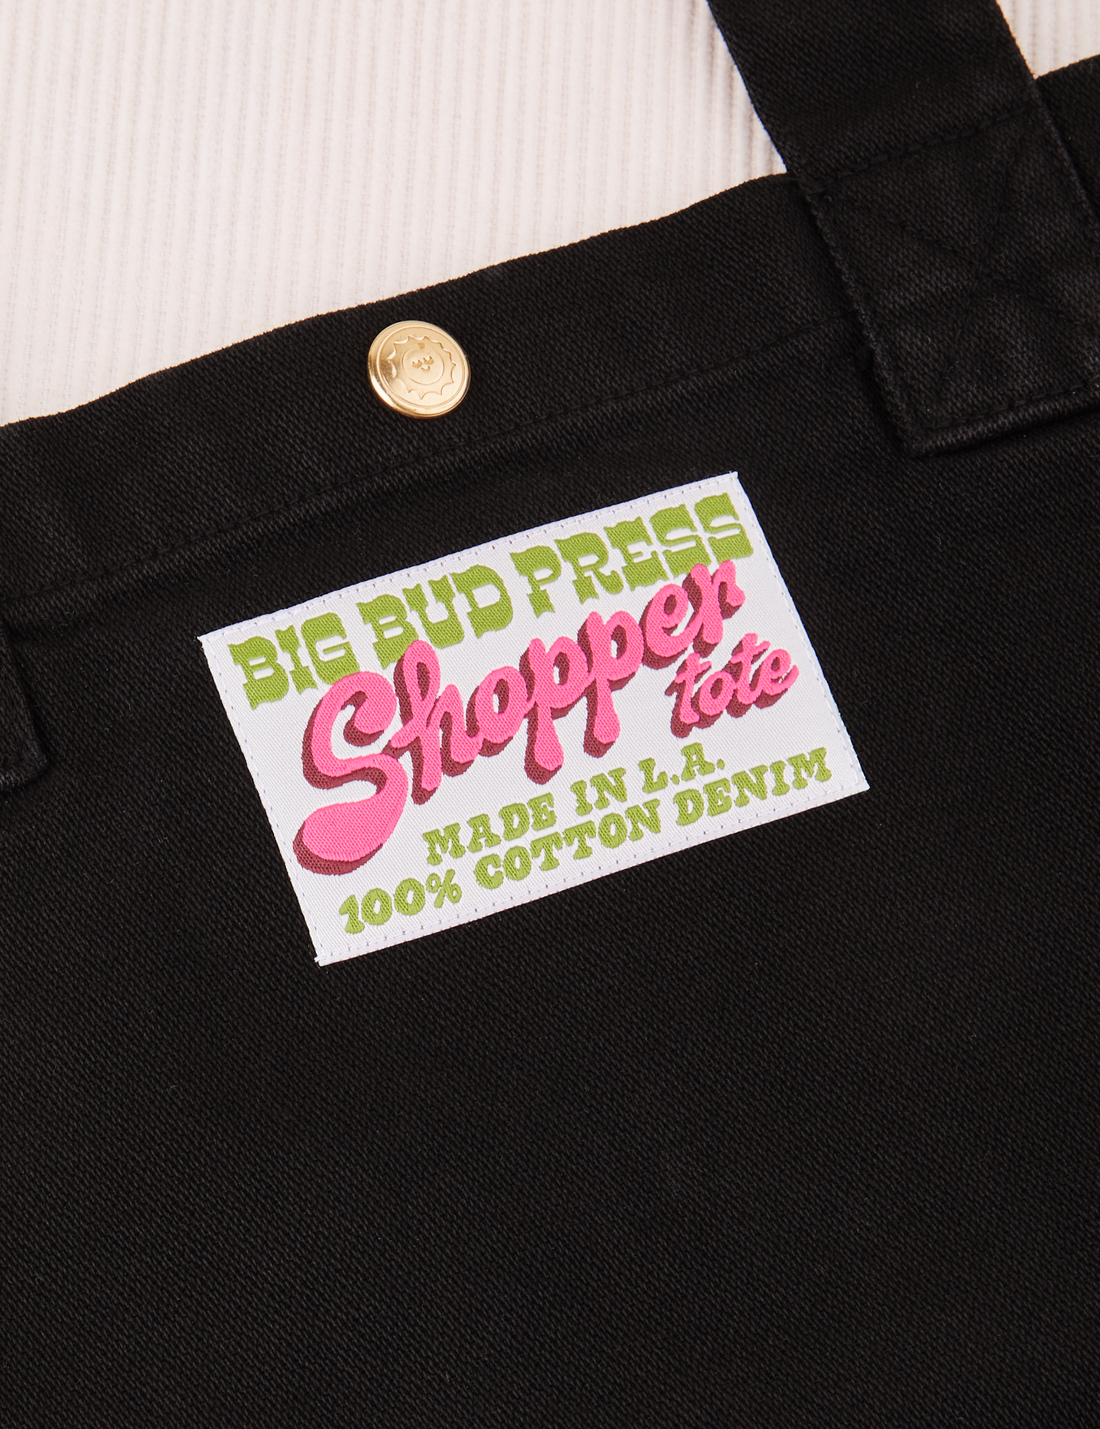 Sun Baby brass snap on Shopper Tote Bag in Black. Bag label with green and pink text that reads "Big Bud Press Shopper Tote, Made in L.A., 100% Cotton Denim" on white background